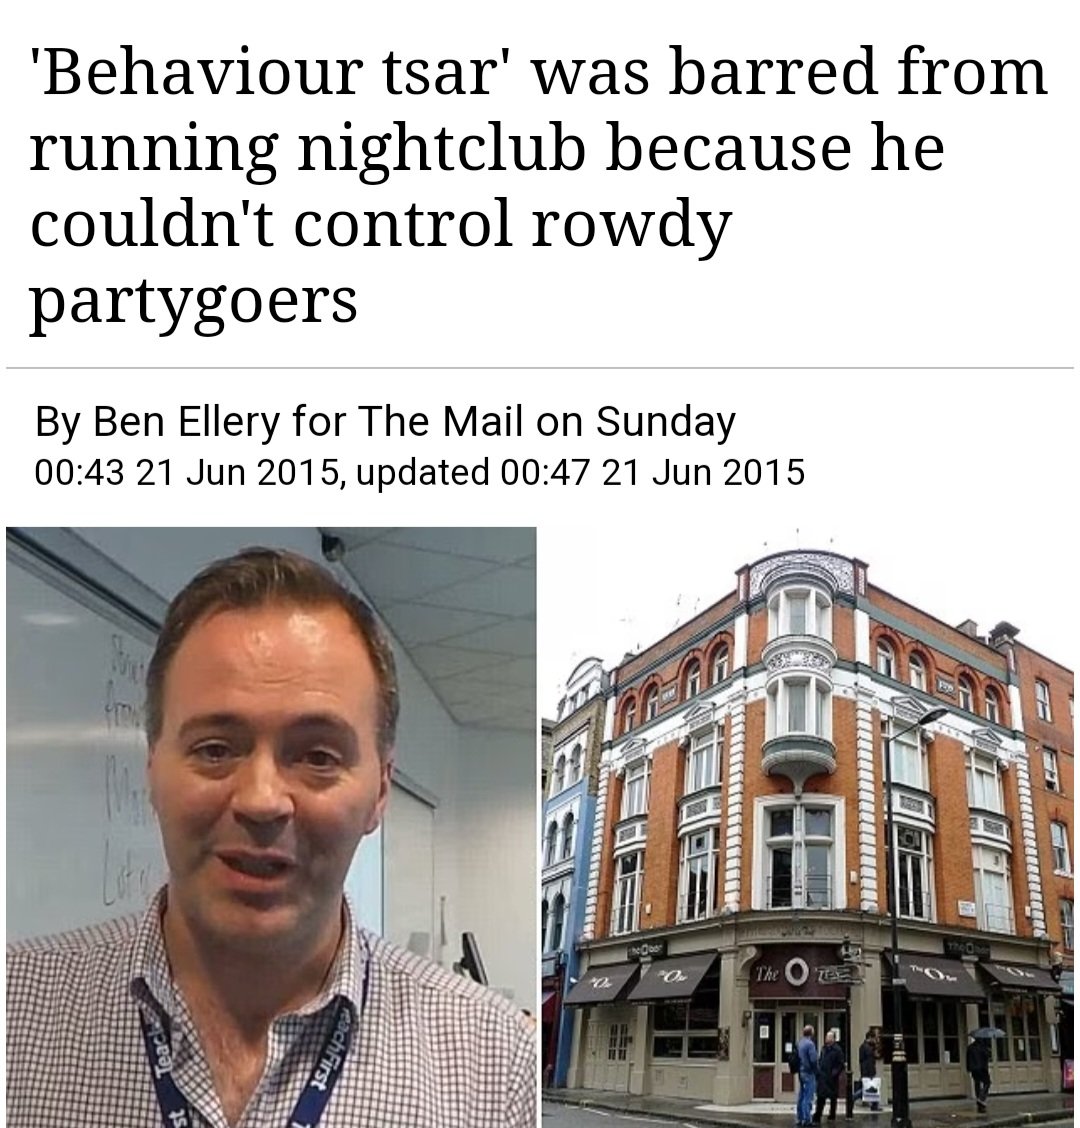 Well, I didn't know *this* about failed nightclub bouncer Tom Bennett: